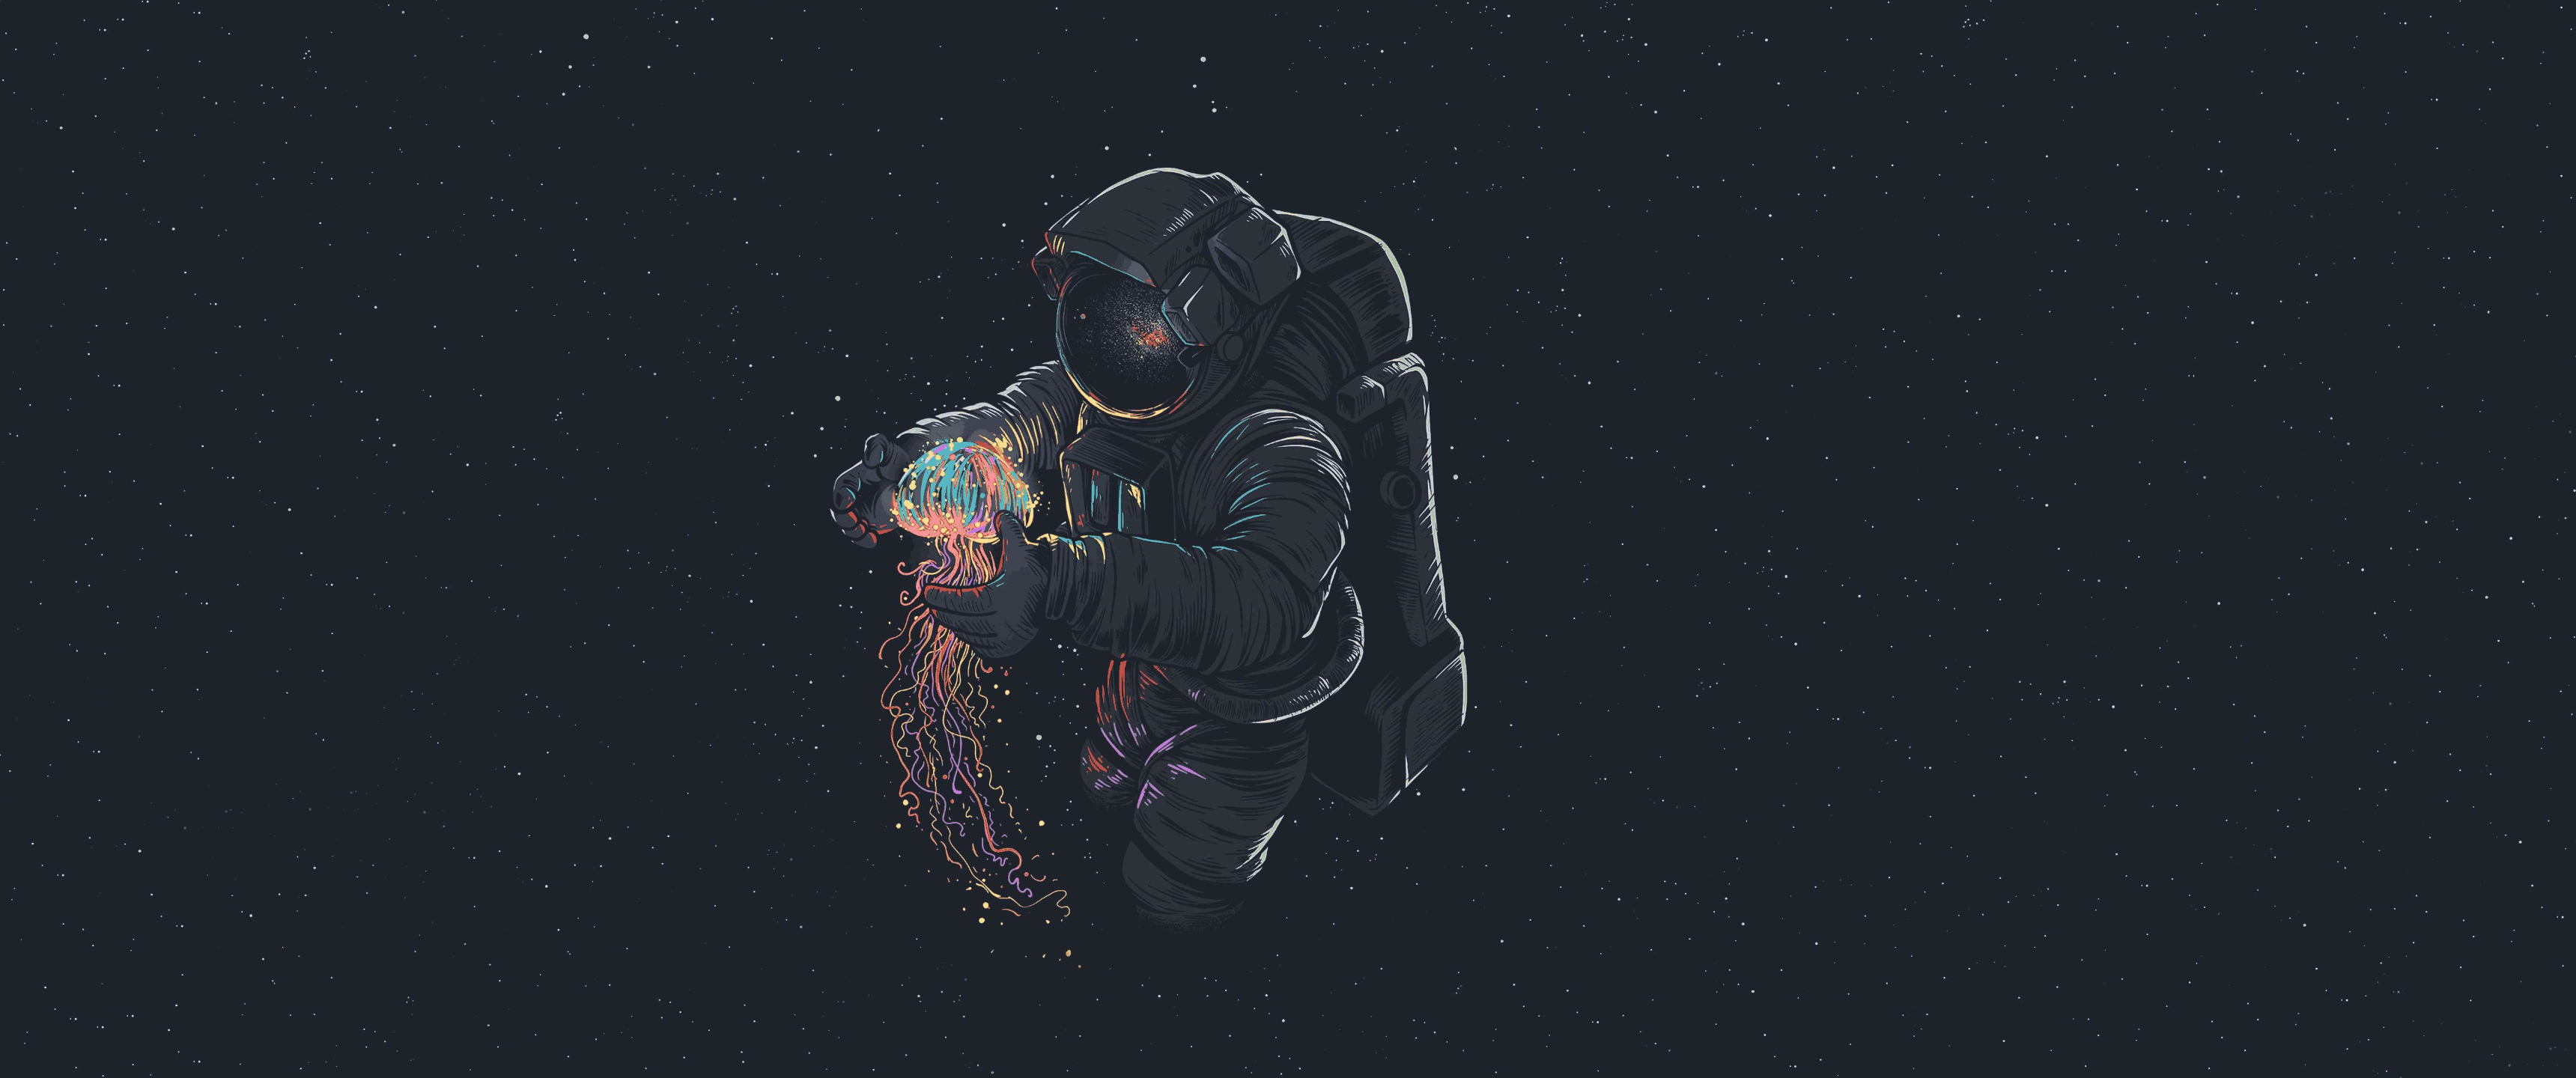 spaceman-oned 3440x1440.png